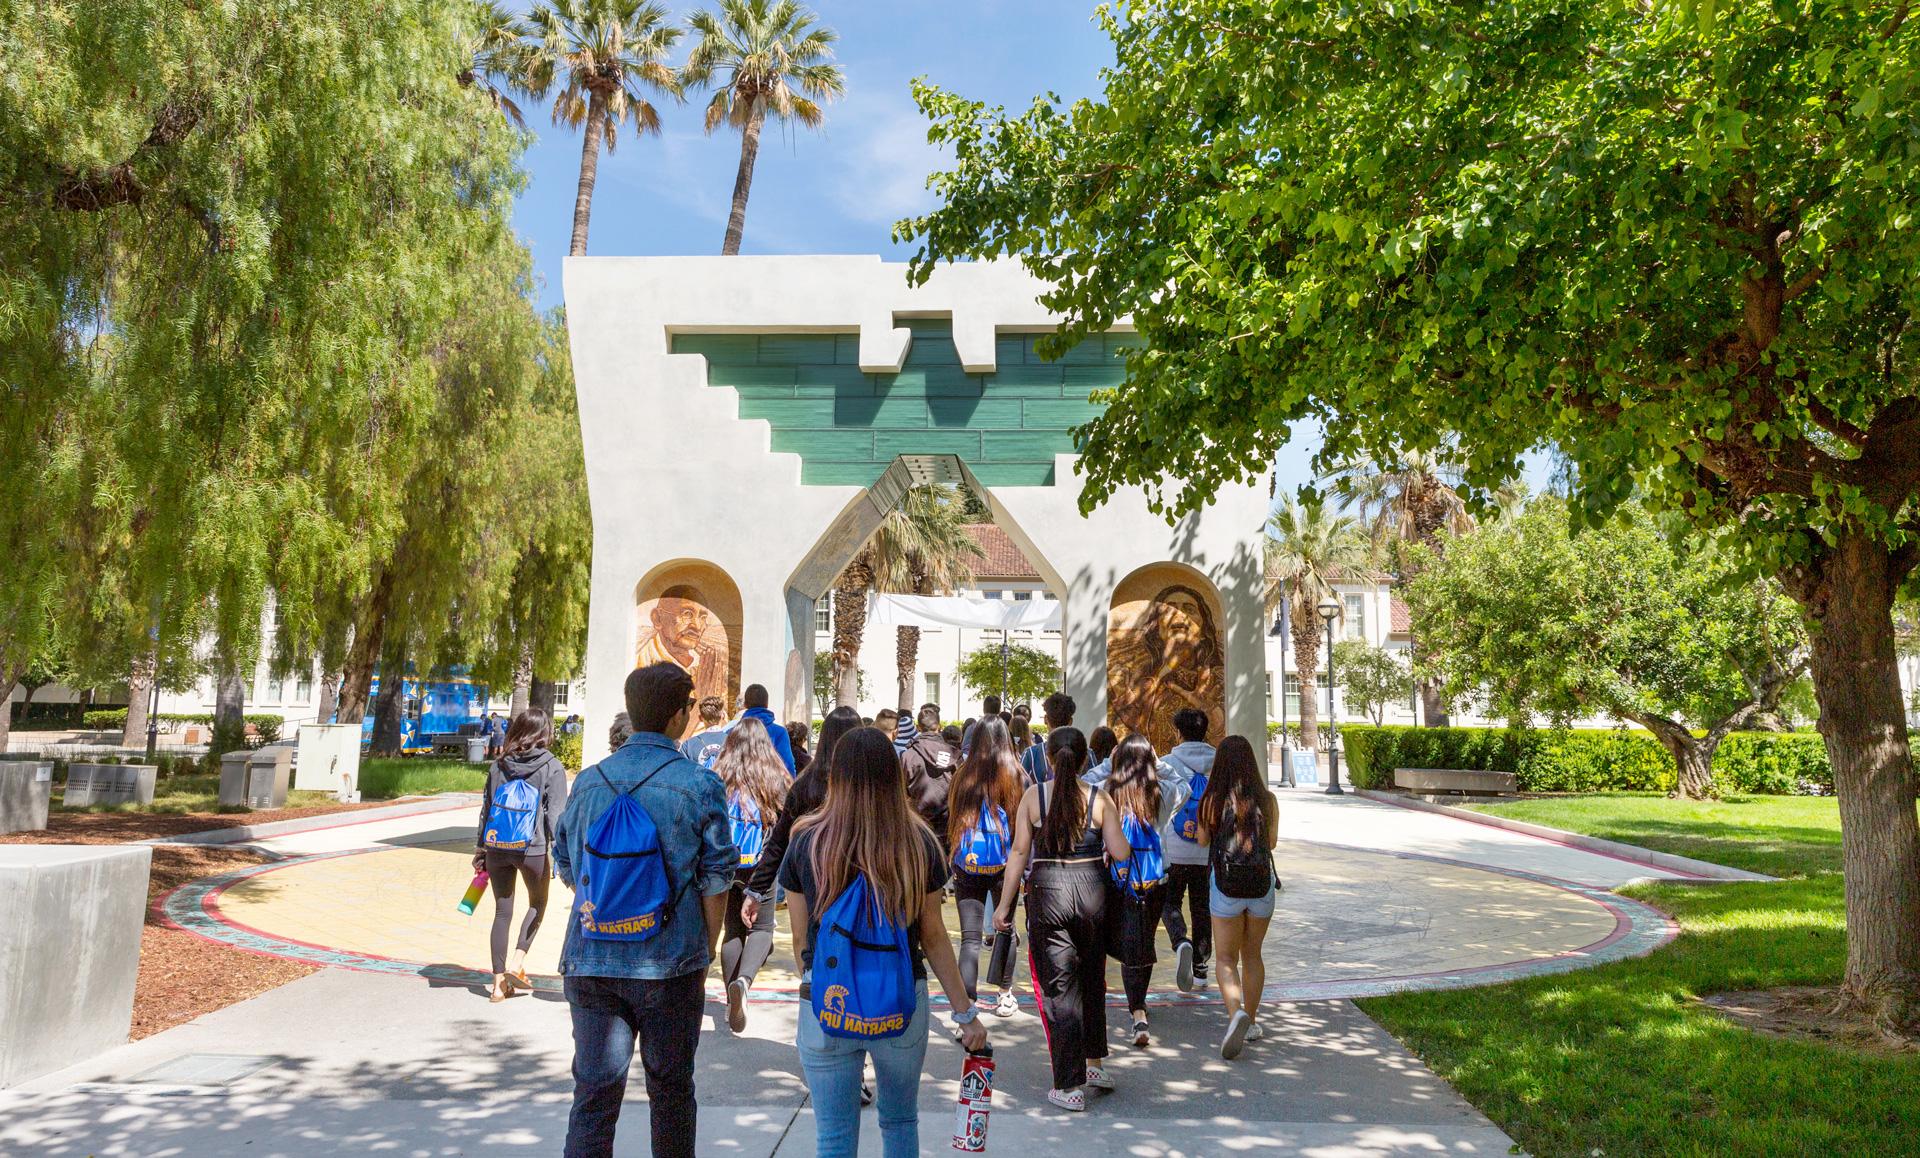 Students wearing 十大菠菜软件 gear are walking through the Cesar Chavez arch that is surrounded by bright green trees.